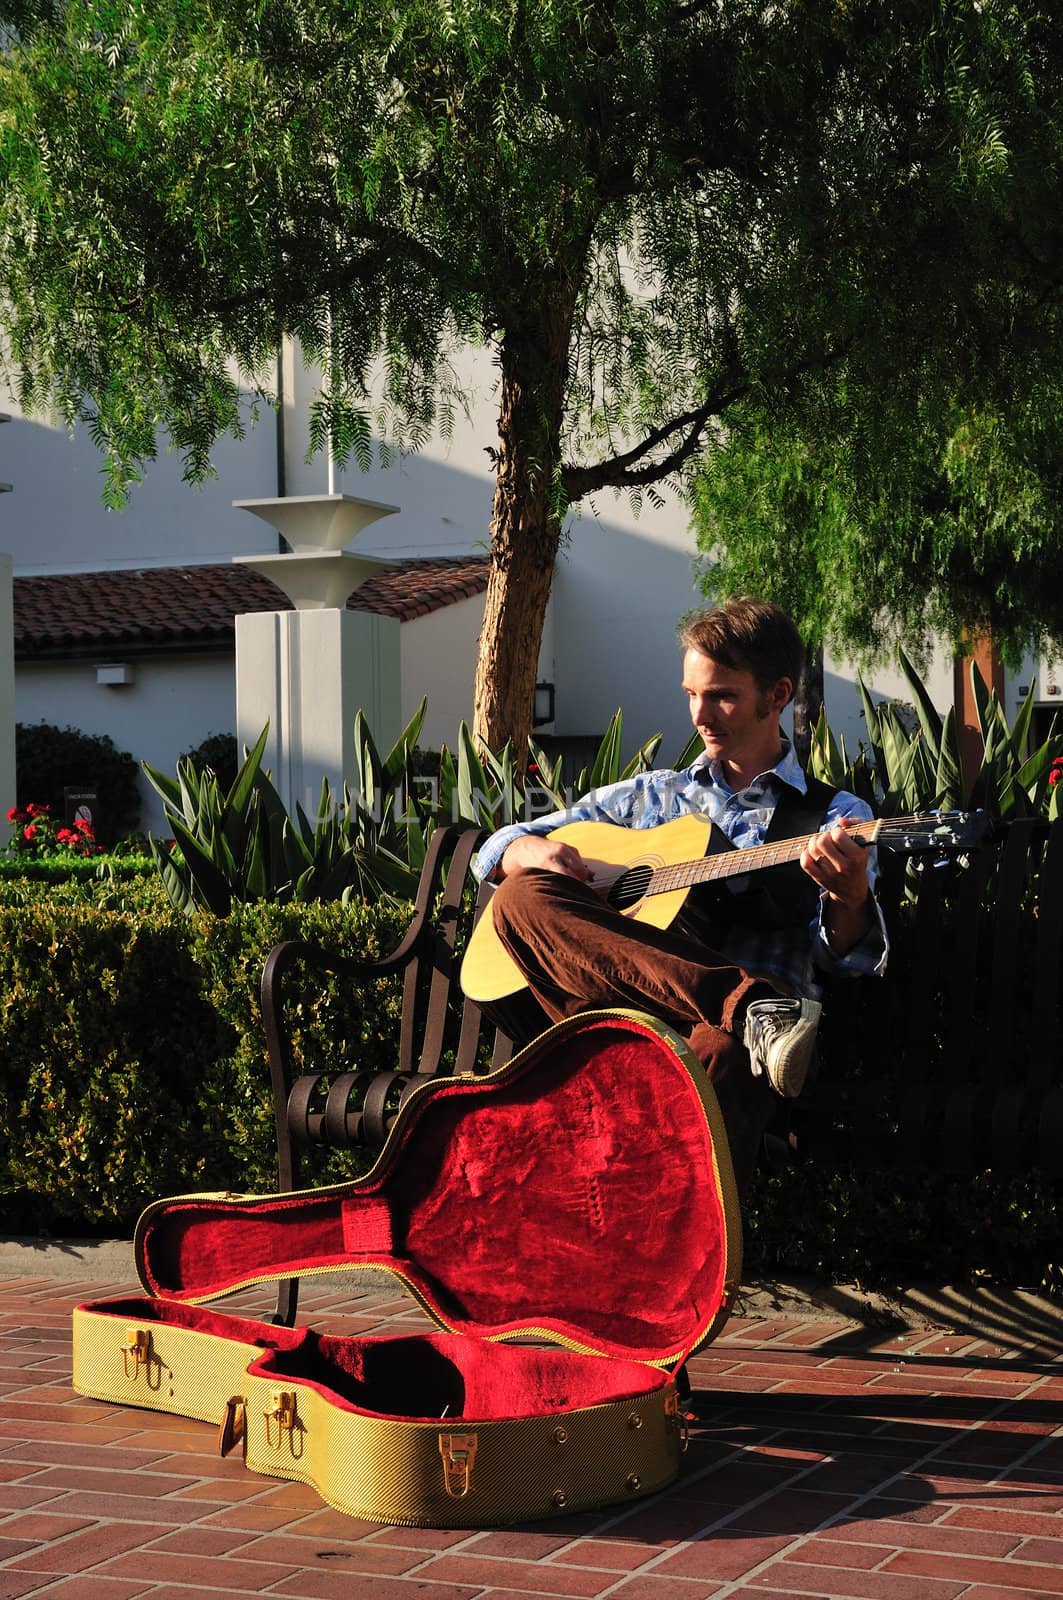 Young man playing music on his guitar for donations in a sunny courtyard.